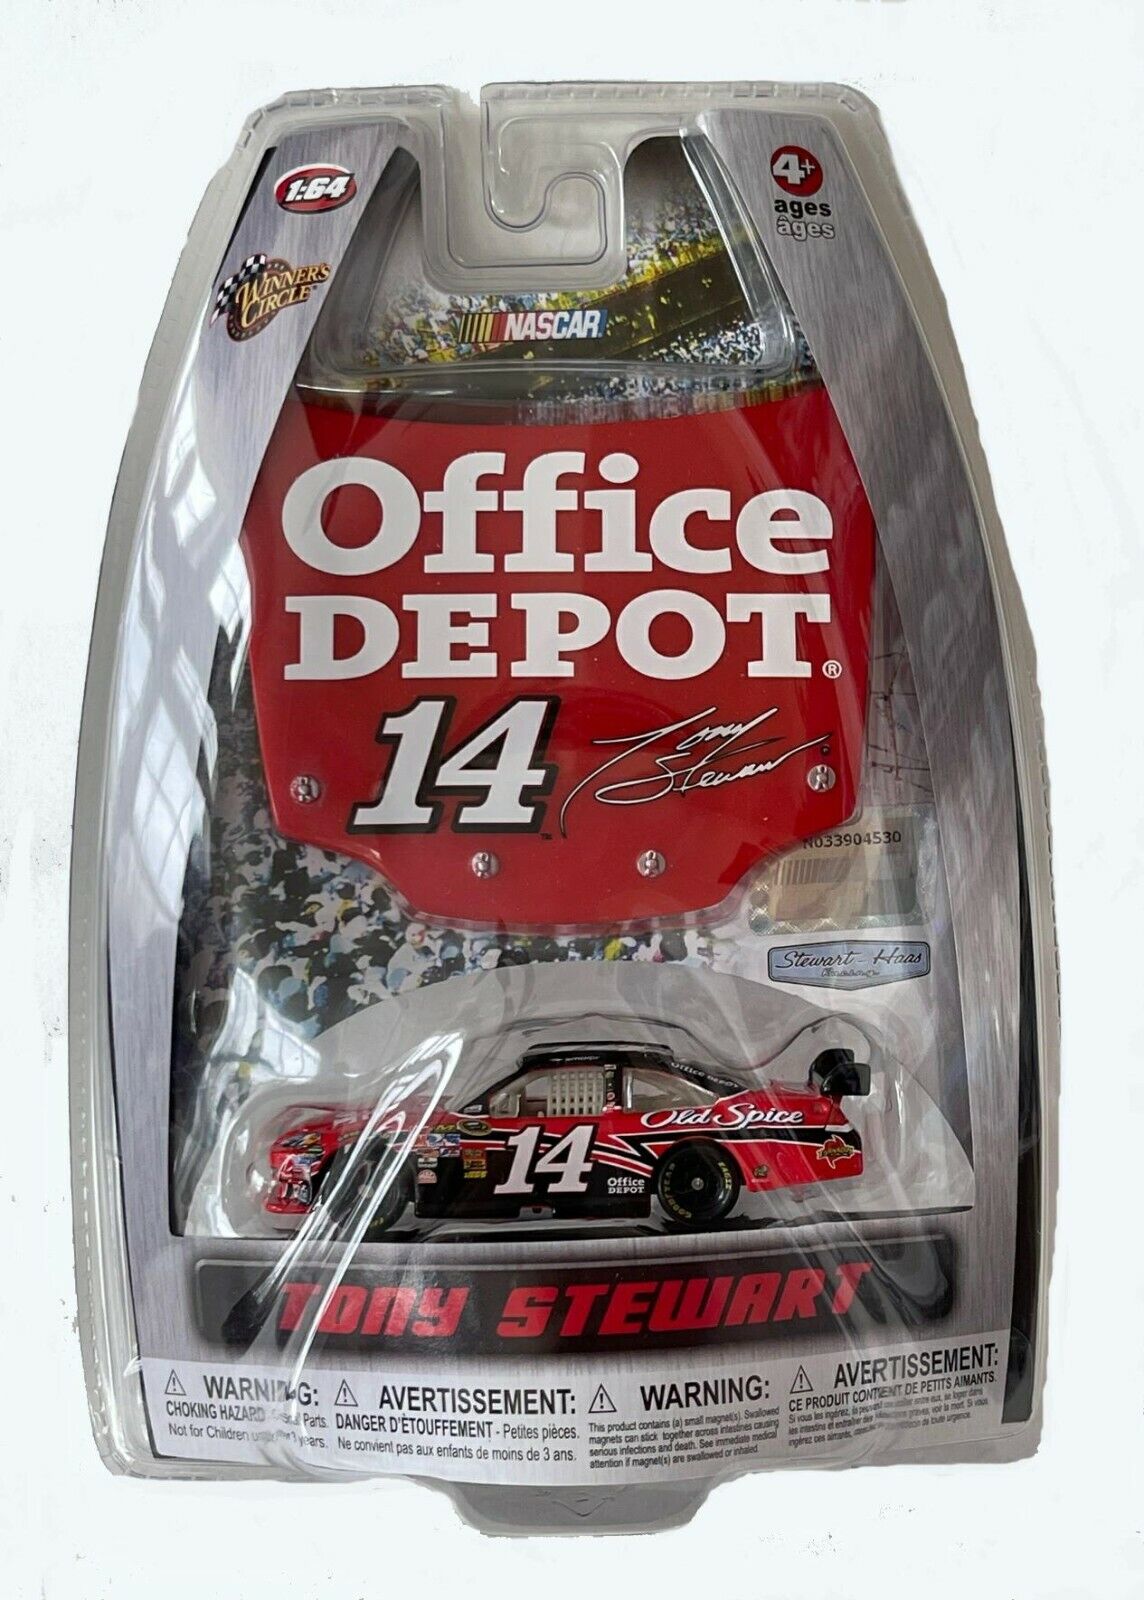 Matchbox Car, Tony Stewart, No. 14, Old Spice, Office Depot, 1:64 Scale, New